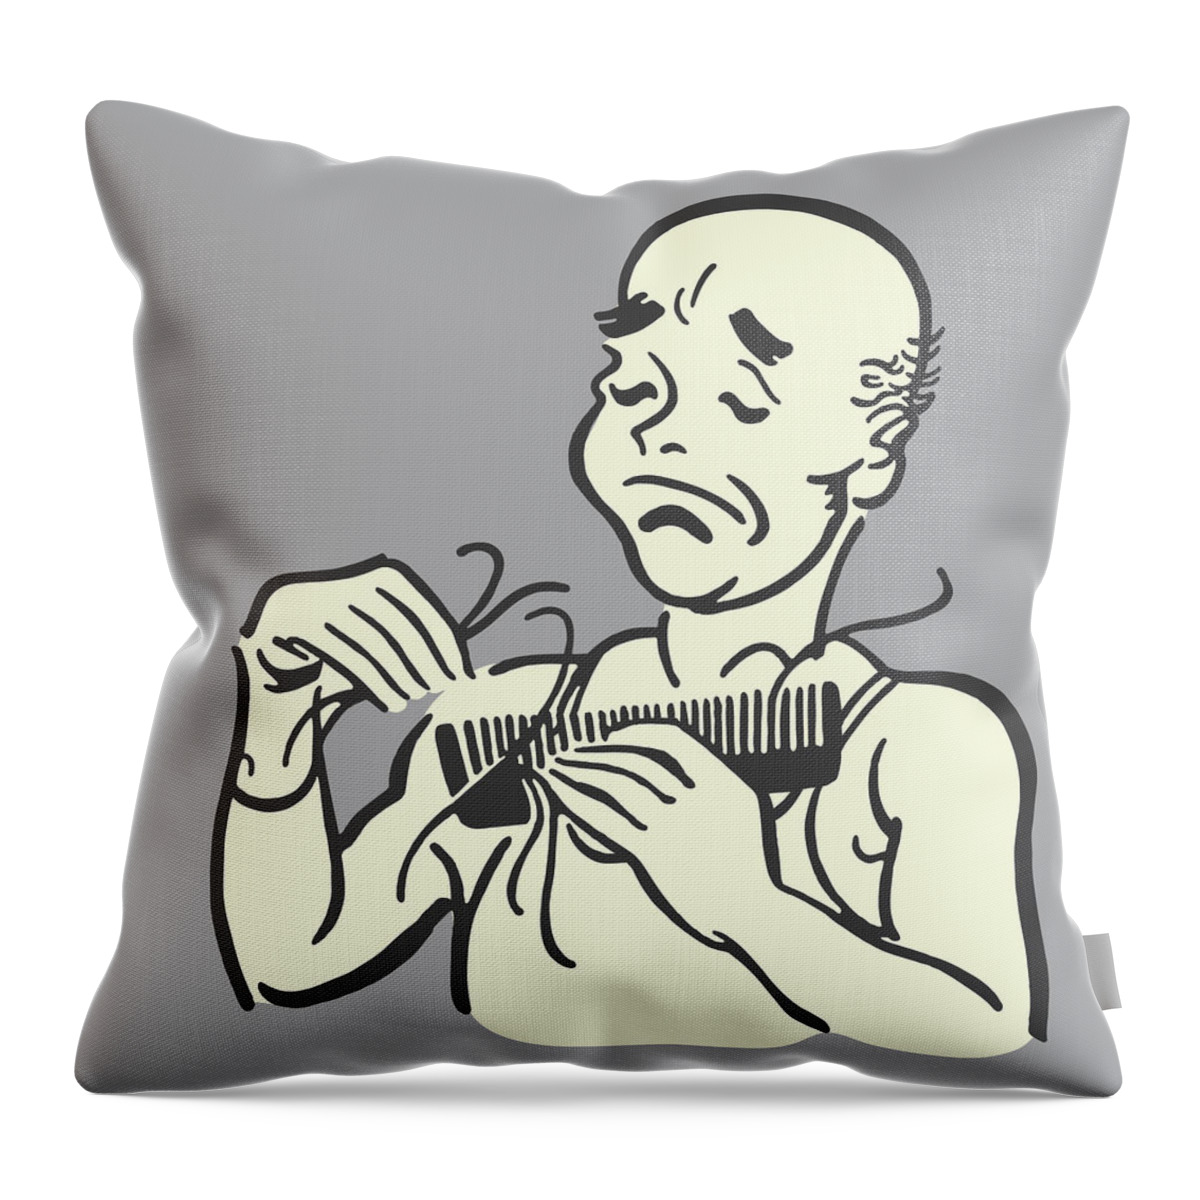 Adult Throw Pillow featuring the drawing Bald Man with a Comb by CSA Images